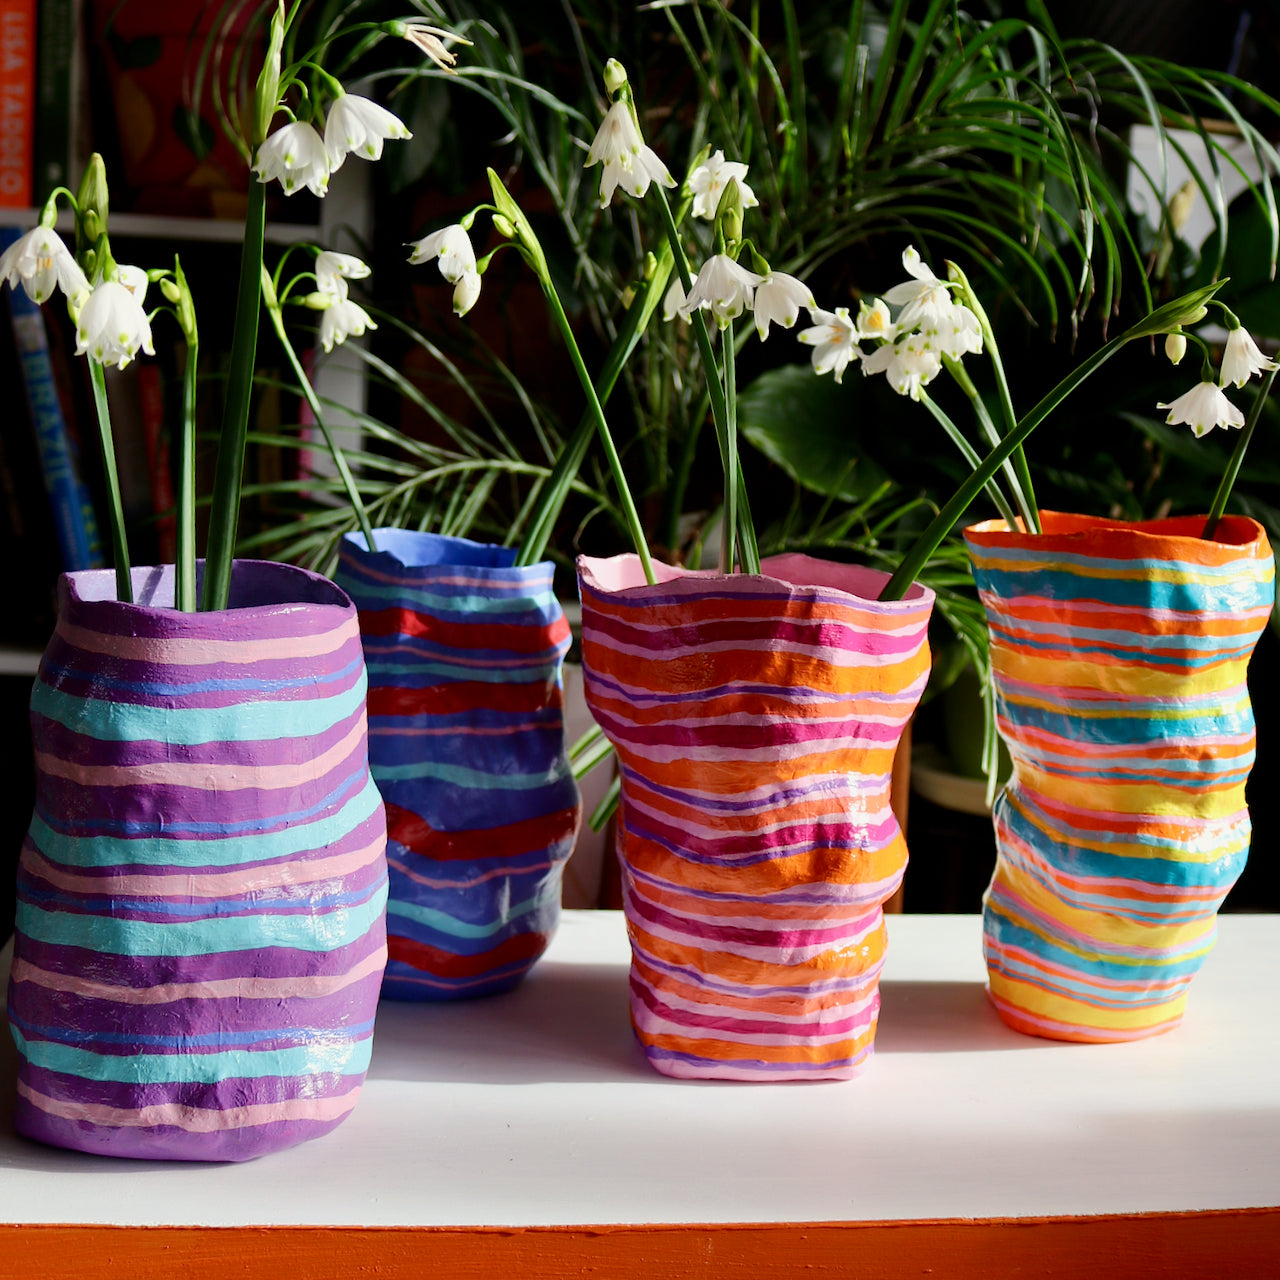 Made in Wanaka. Quirky, colourful homewares designed and crafted by New Zealand artist and jeweller Briar Hardy-Hesson.